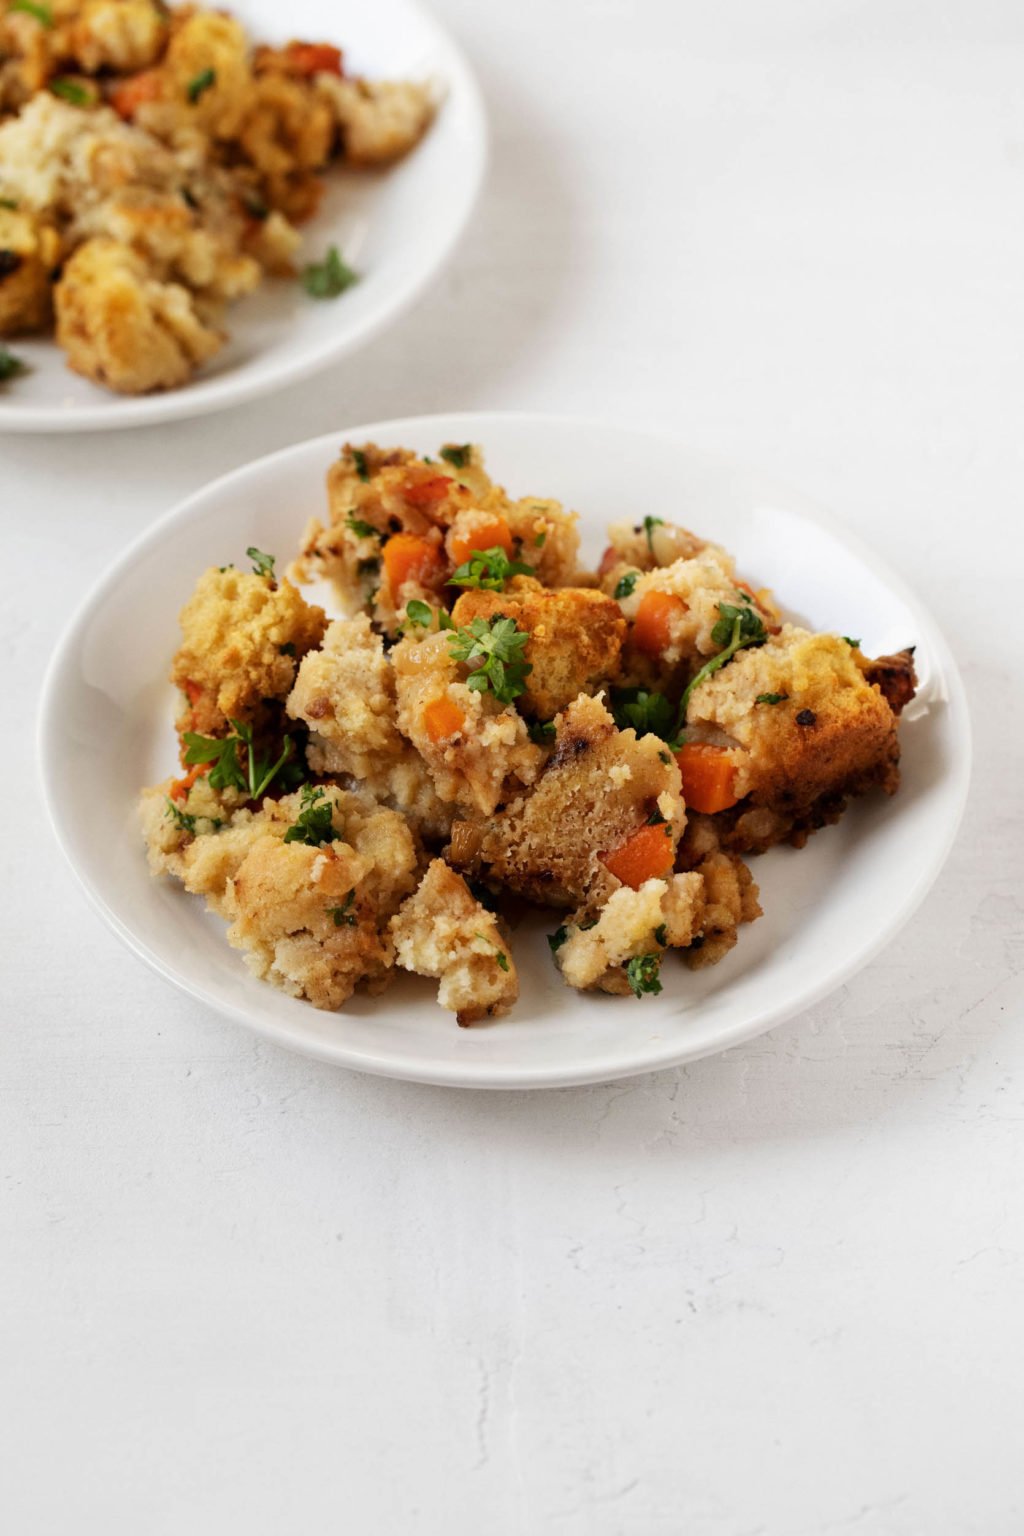 Two plates, topped with vegan cornbread stuffing and herbs.